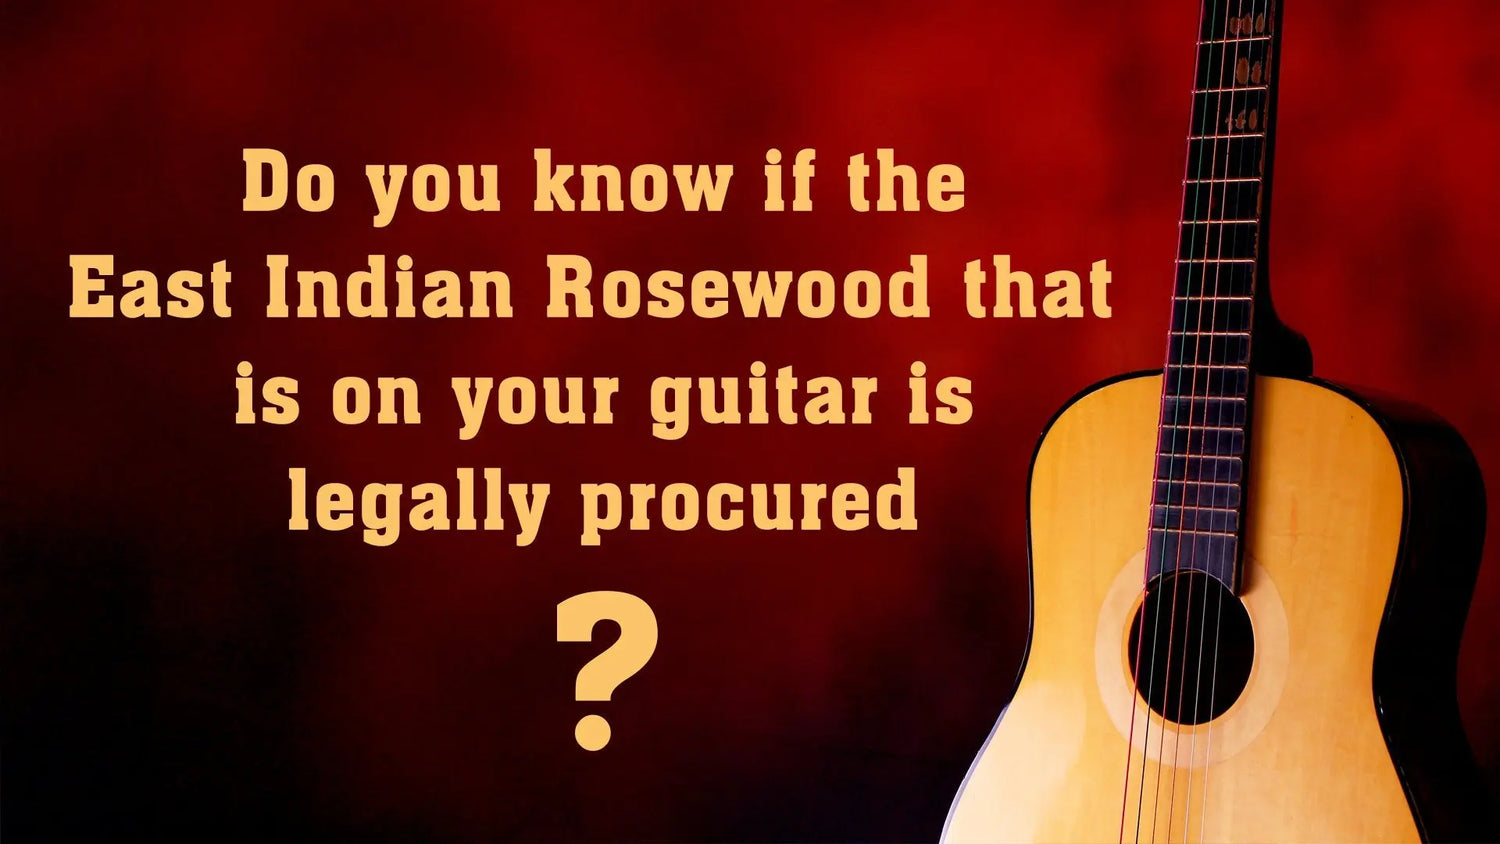 Do you know if the East Indian Rosewood that is on your guitar is legally procured?